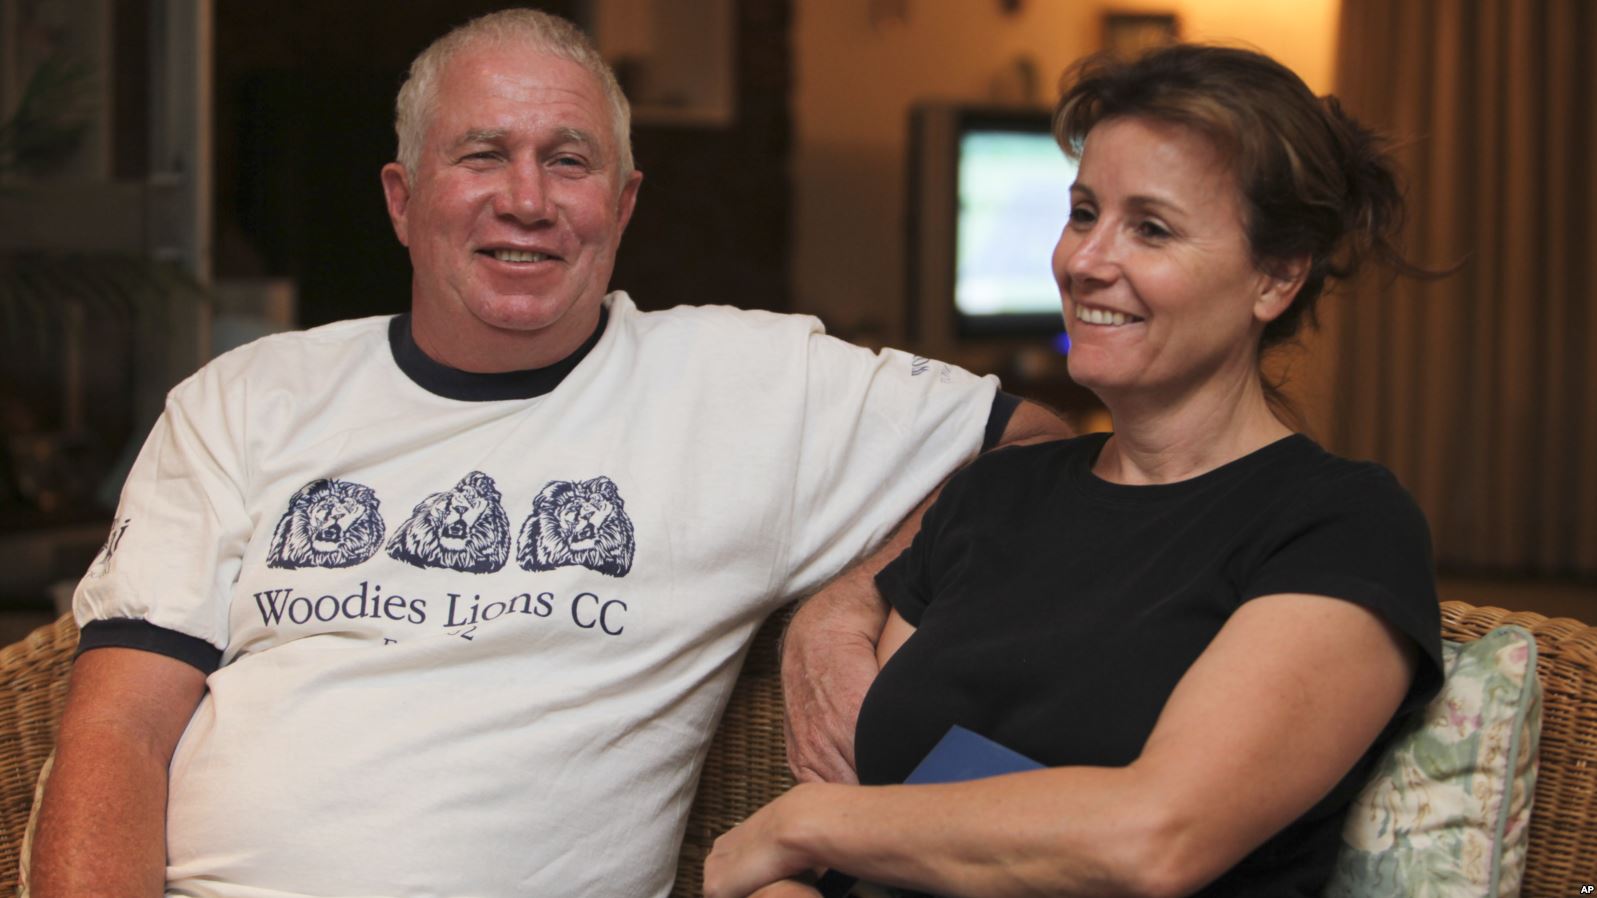 Roy Bennett, a senior Zimbabwean MDC opposition official, and his wife, Heather, relax at a friends home in Mutare, about 200 kilometers east of Harare, Zimbabwe, following his release from prison. A helicopter crash killed Bennett and his wife while on holiday in a remote part of the U.S. state of New Mexico, authorities said Jan. 18, 2018.